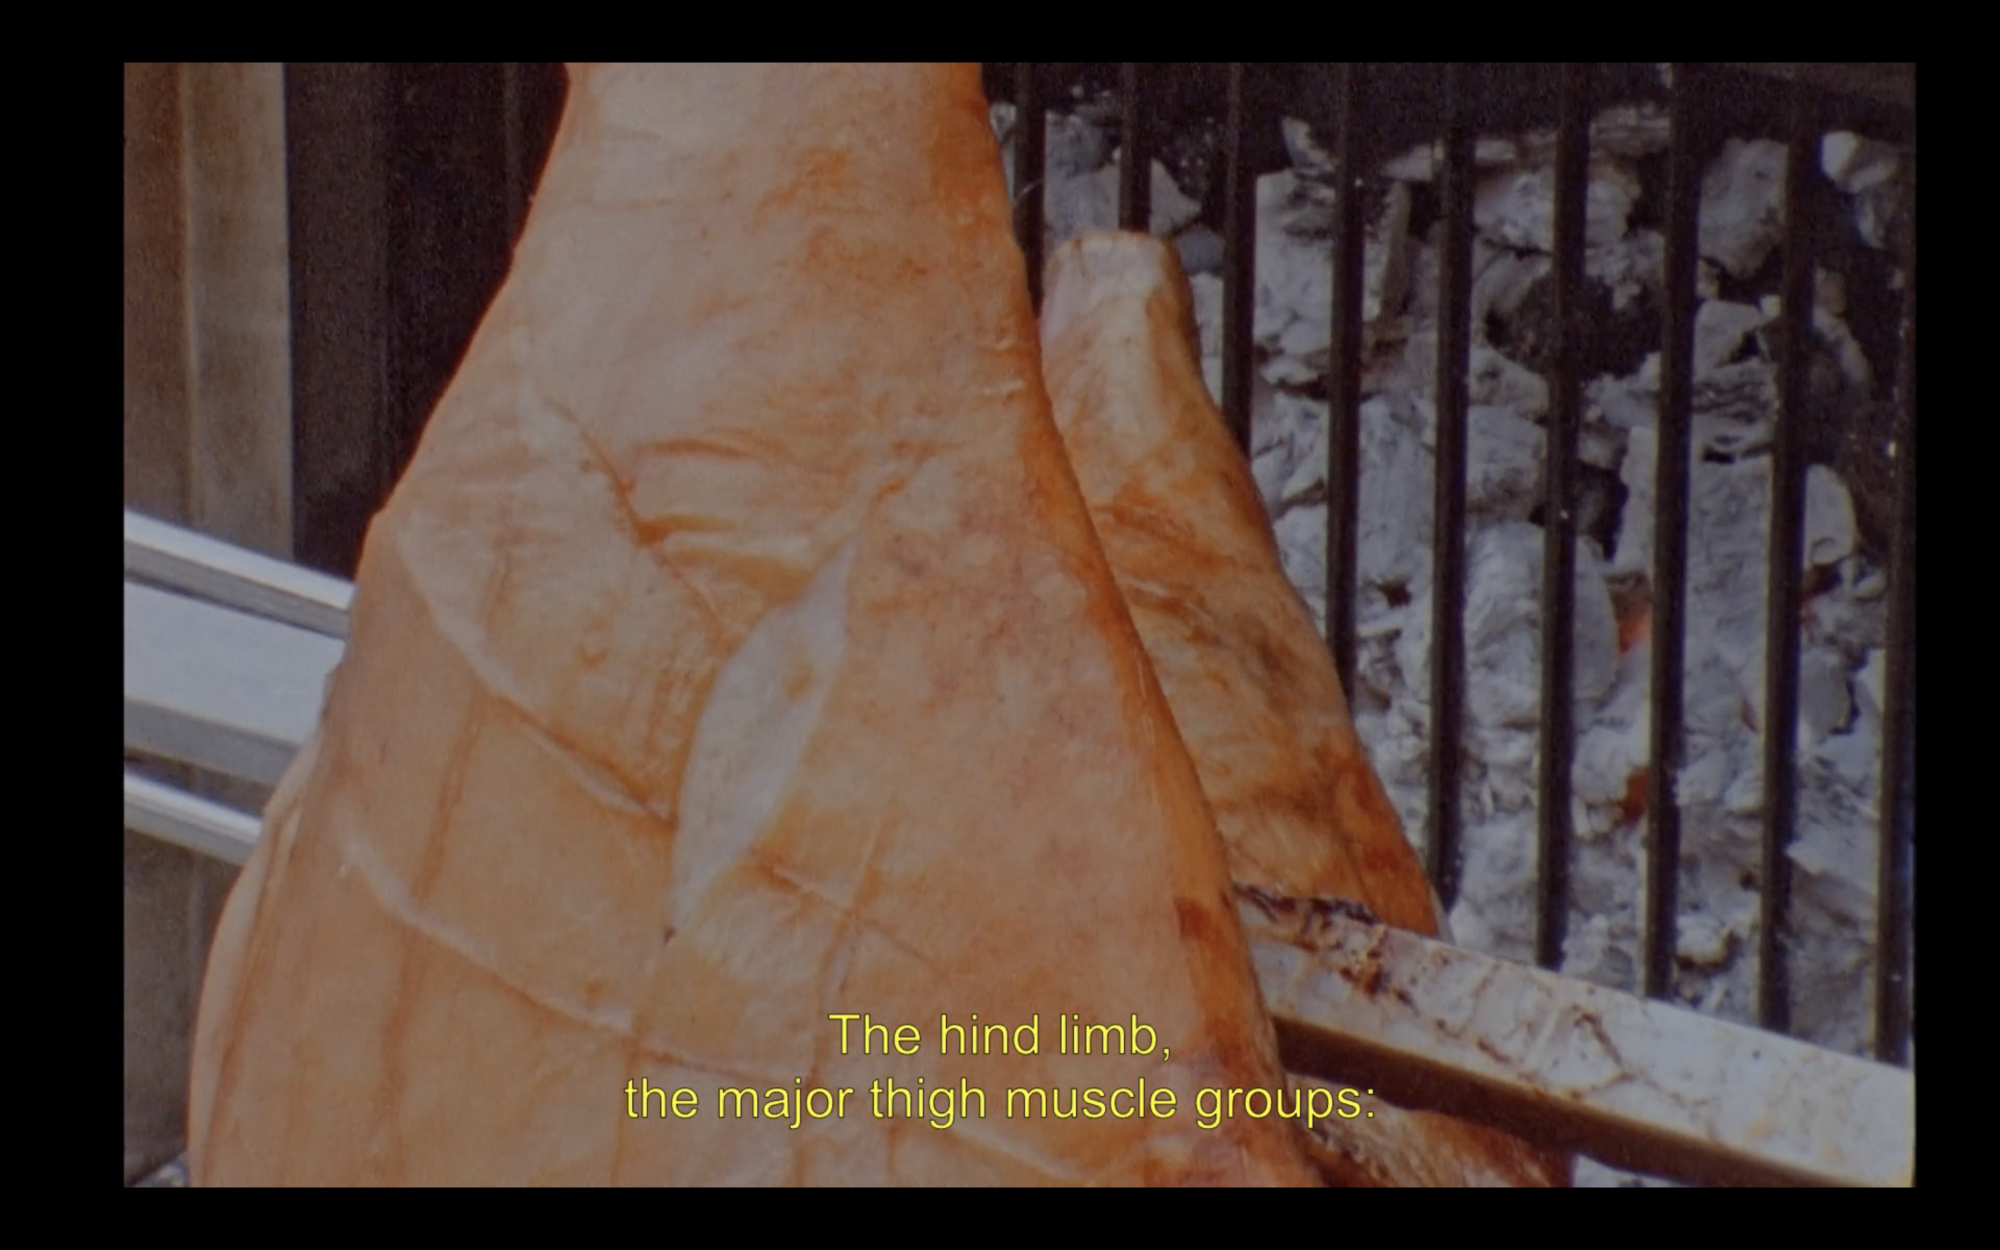 A still of hanging meat, with the subtitle 